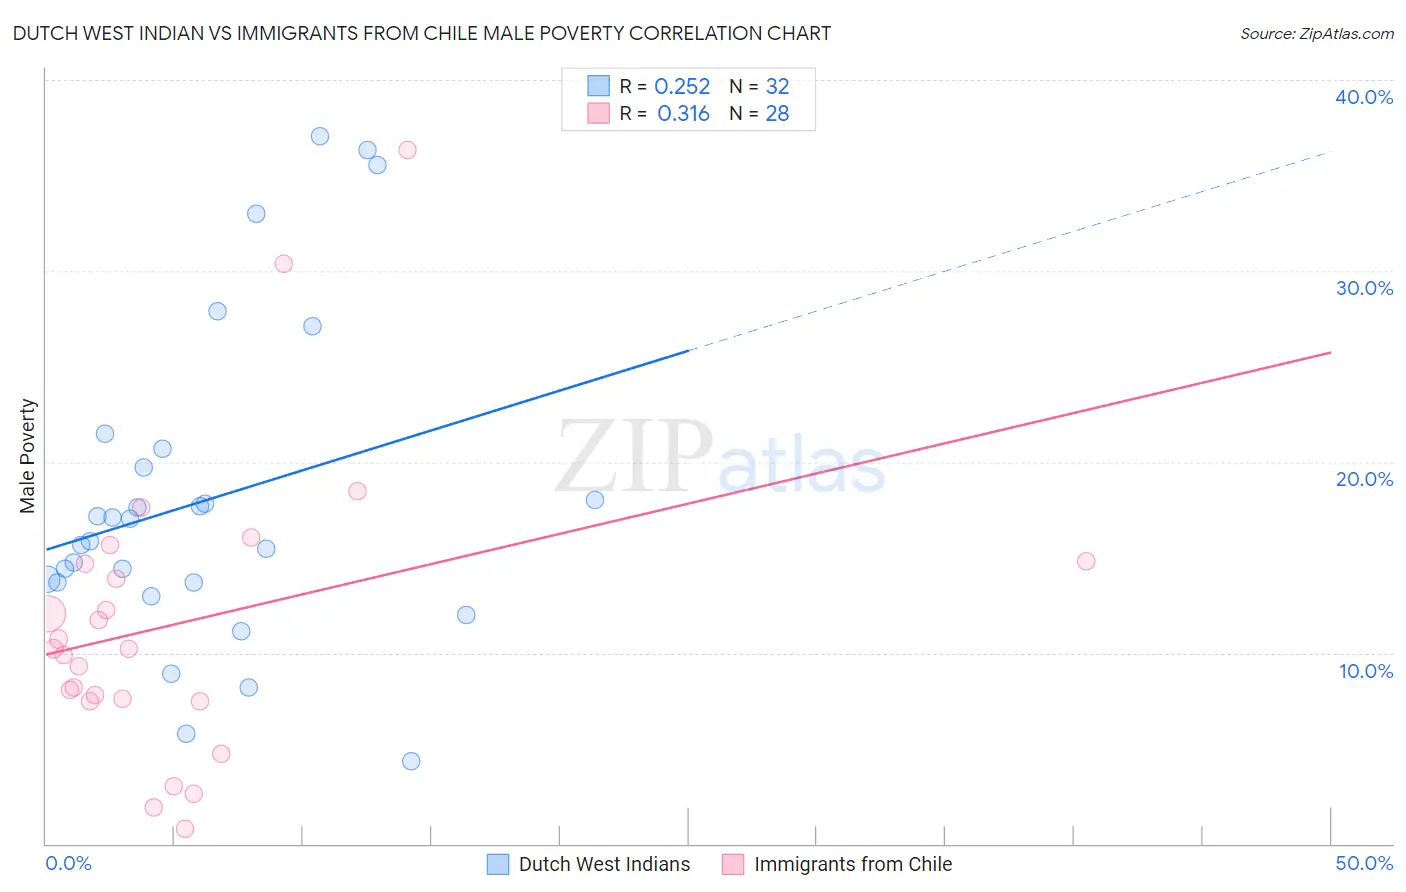 Dutch West Indian vs Immigrants from Chile Male Poverty